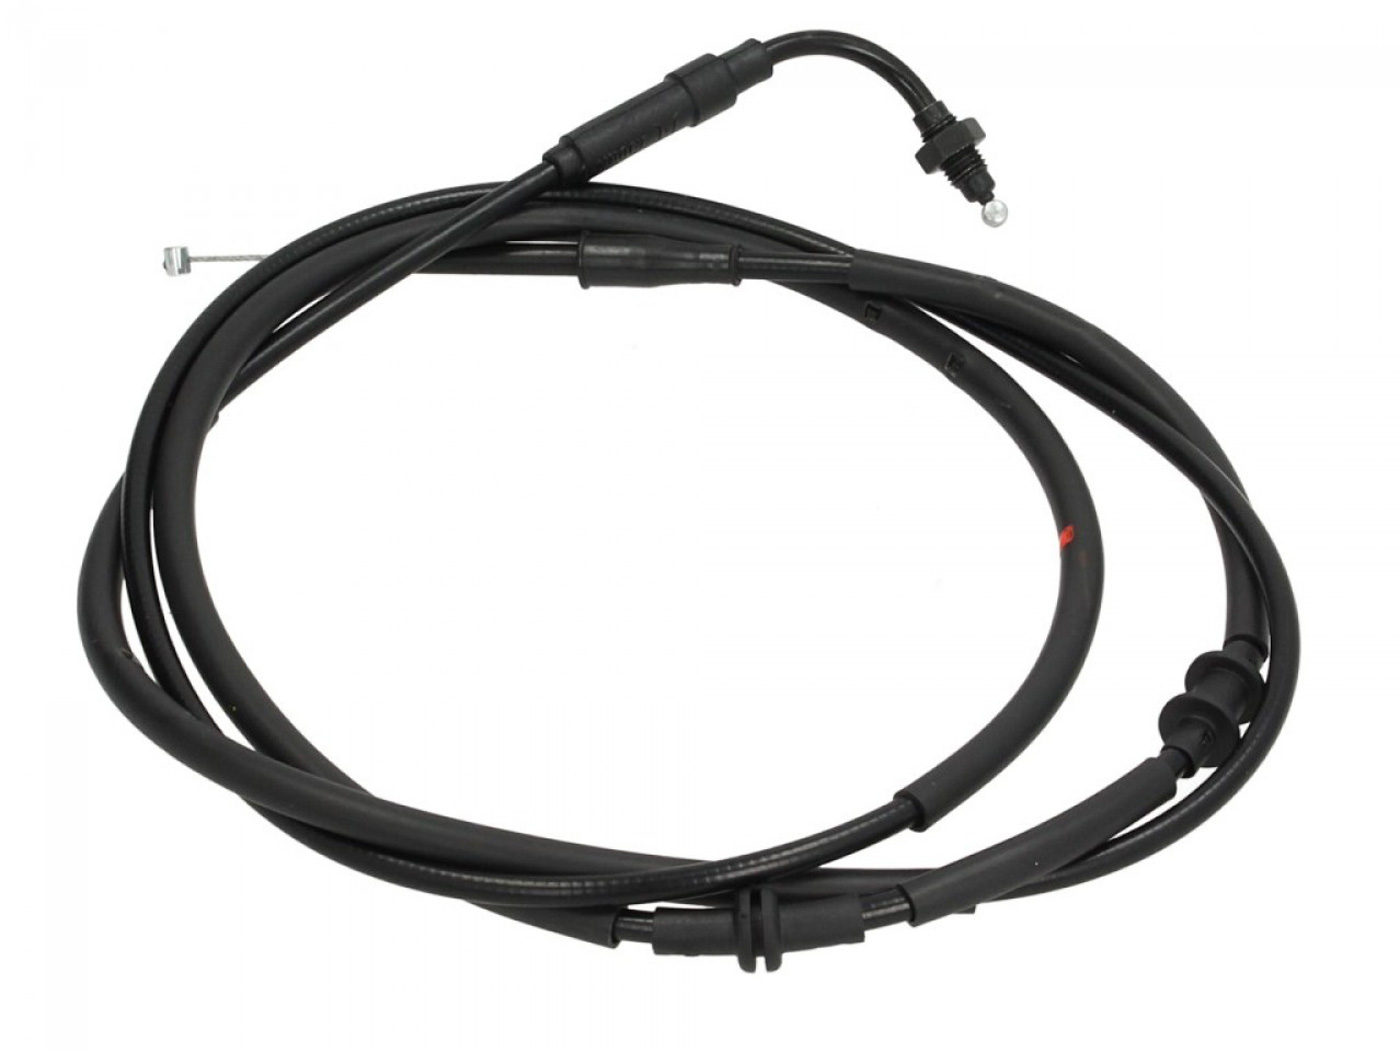 Throttle cable, opening the throttle -PIAGGIO- Vespa GTS 250 (ZAPM45100),  Vespa GTS 300 (ZAPM45200, ZAPM45202, ZAPMA3300), Vespa GTS Super 125  (ZAPM45300, ZAPM45301), Vespa GTS Super 300 (ZAPM45200, ZAPM45202,  ZAPMA3300), Vespa GTS Super